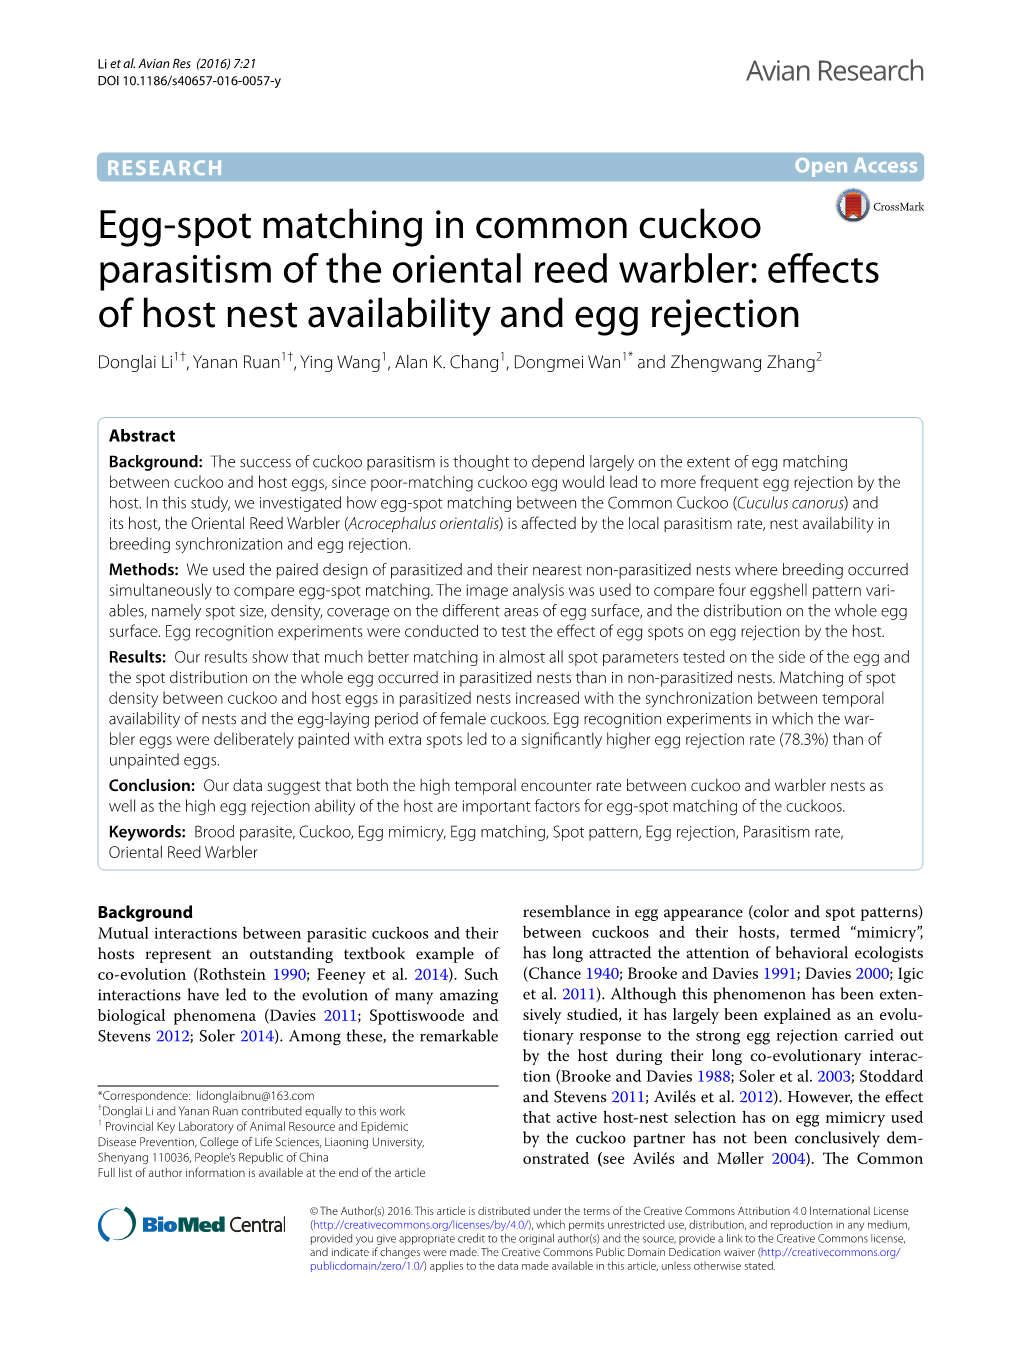 Egg-Spot Matching in Common Cuckoo Parasitism of the Oriental Reed